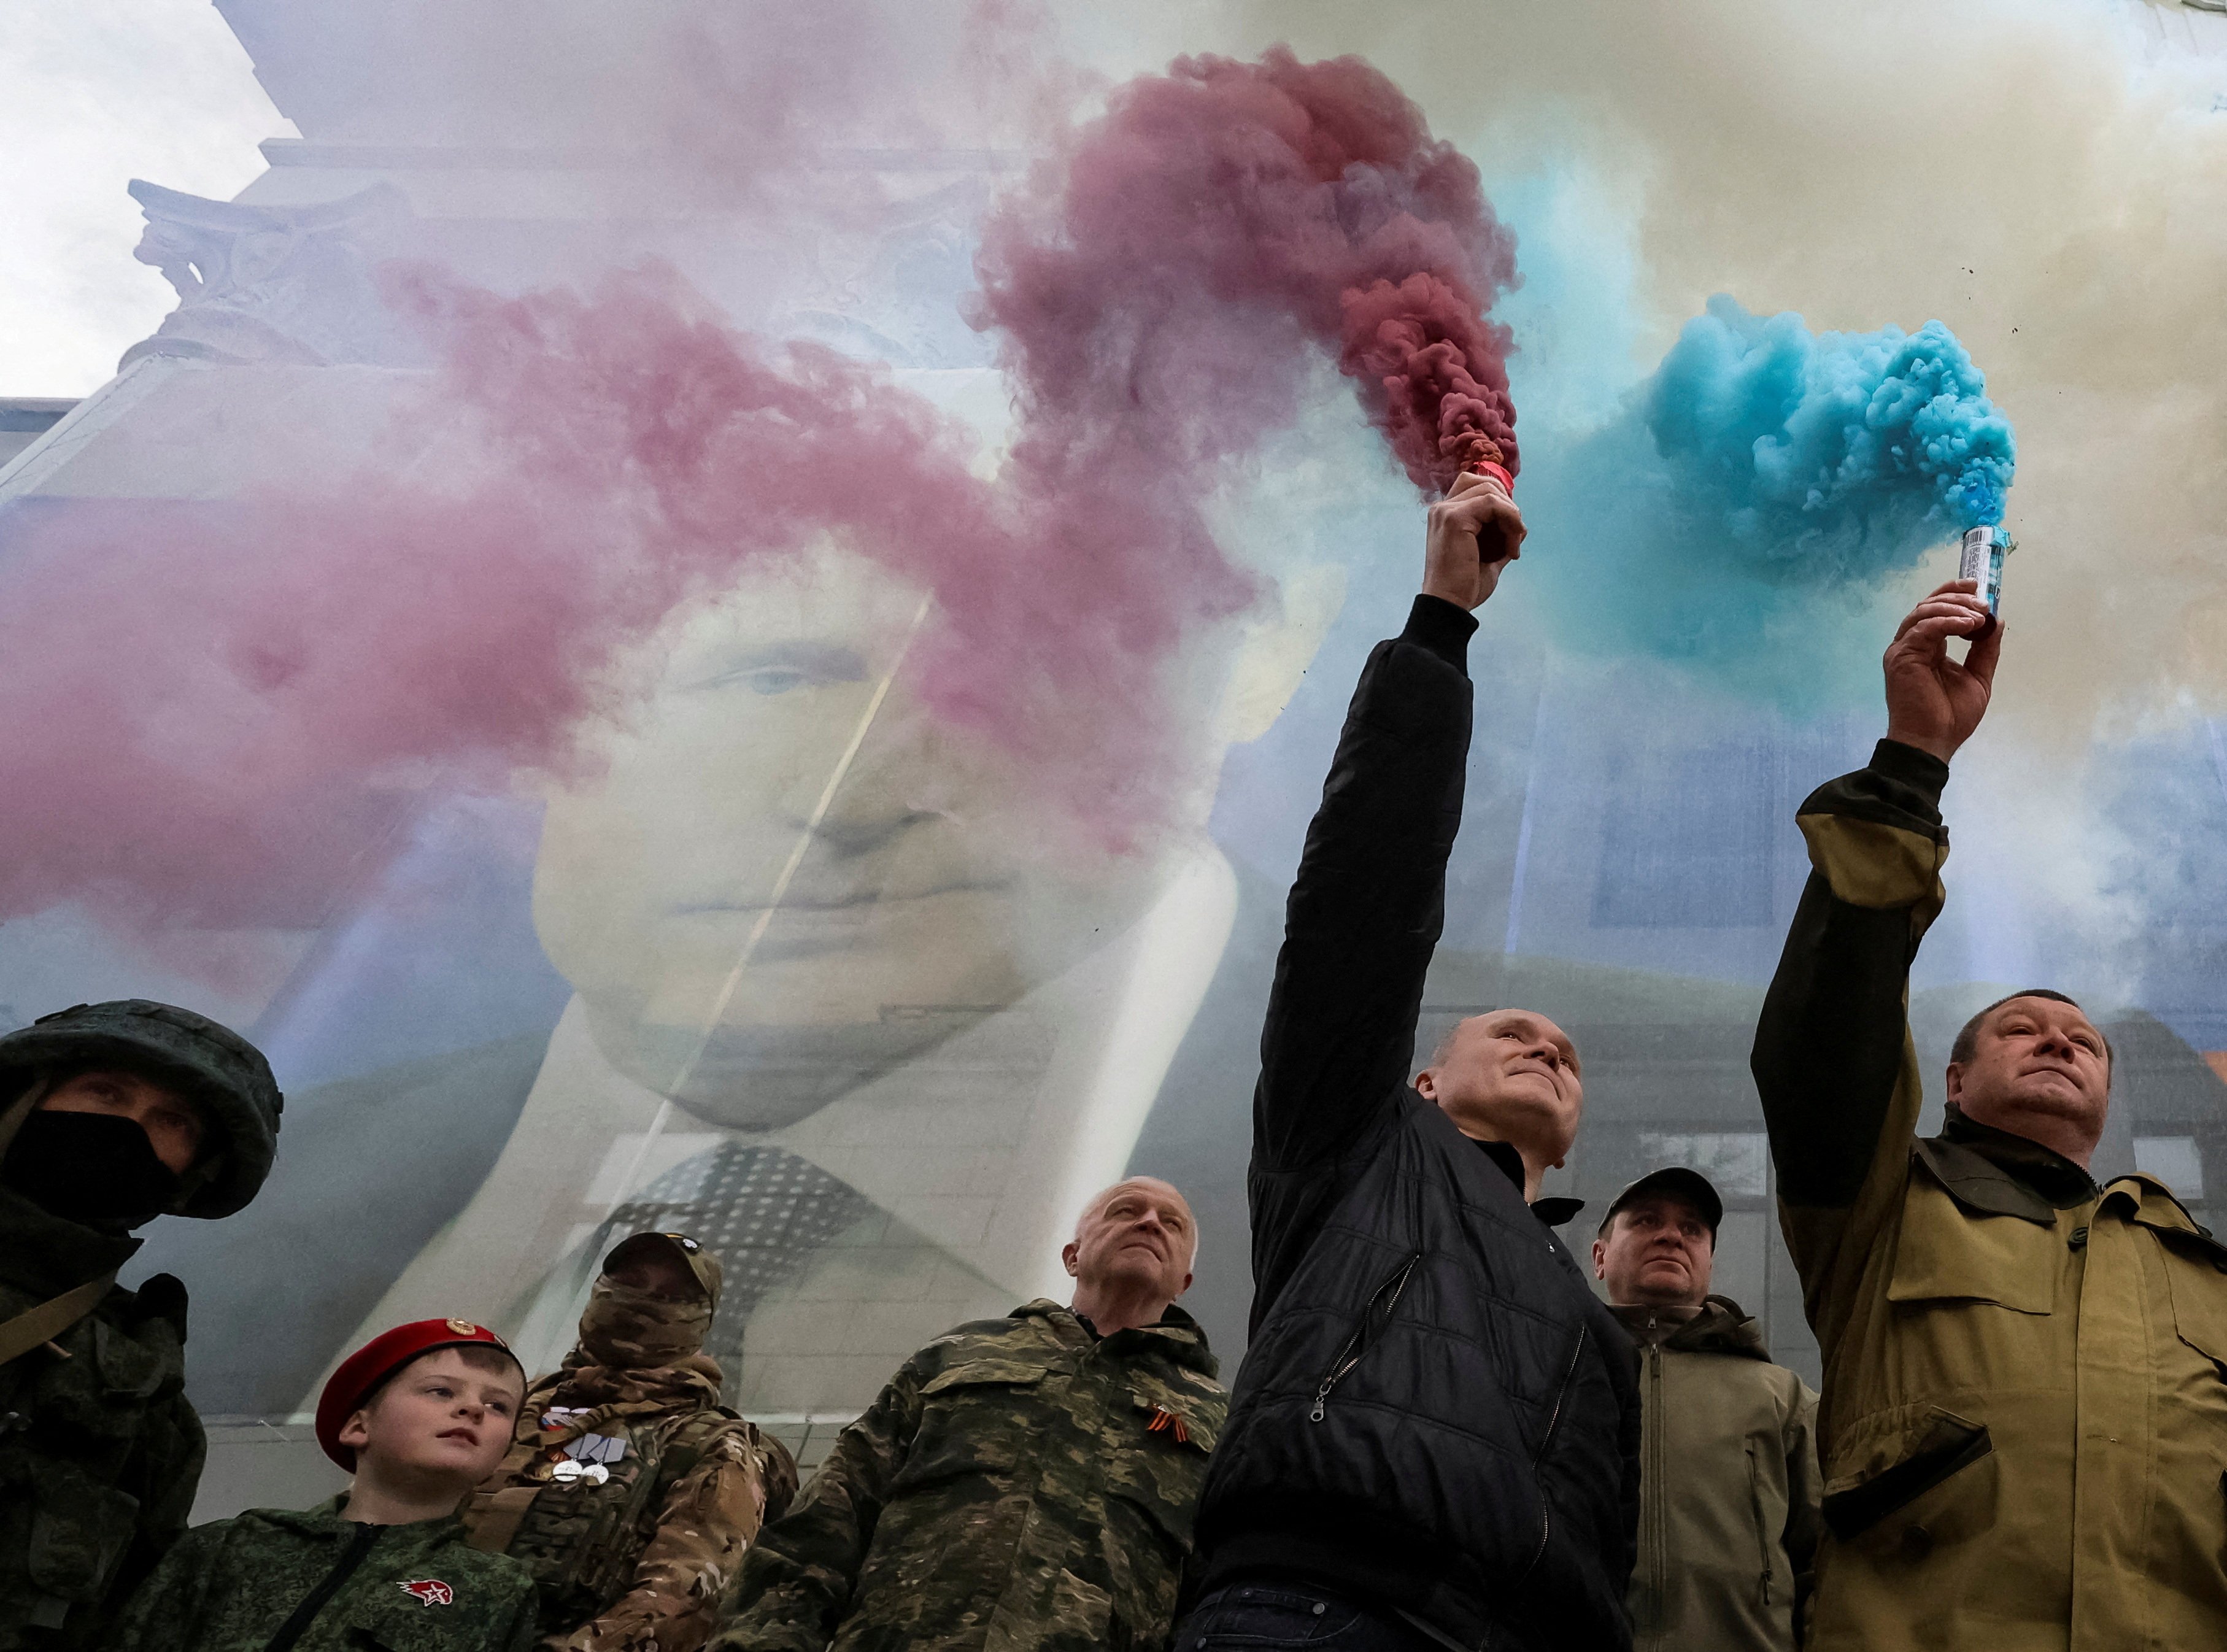 Participants burn flares in front of a banner with a portrait of Russian President Vladimir Putin during a patriotic flash mob marking the ninth anniversary of Russia’s annexation of Crimea. Photo: Reuters